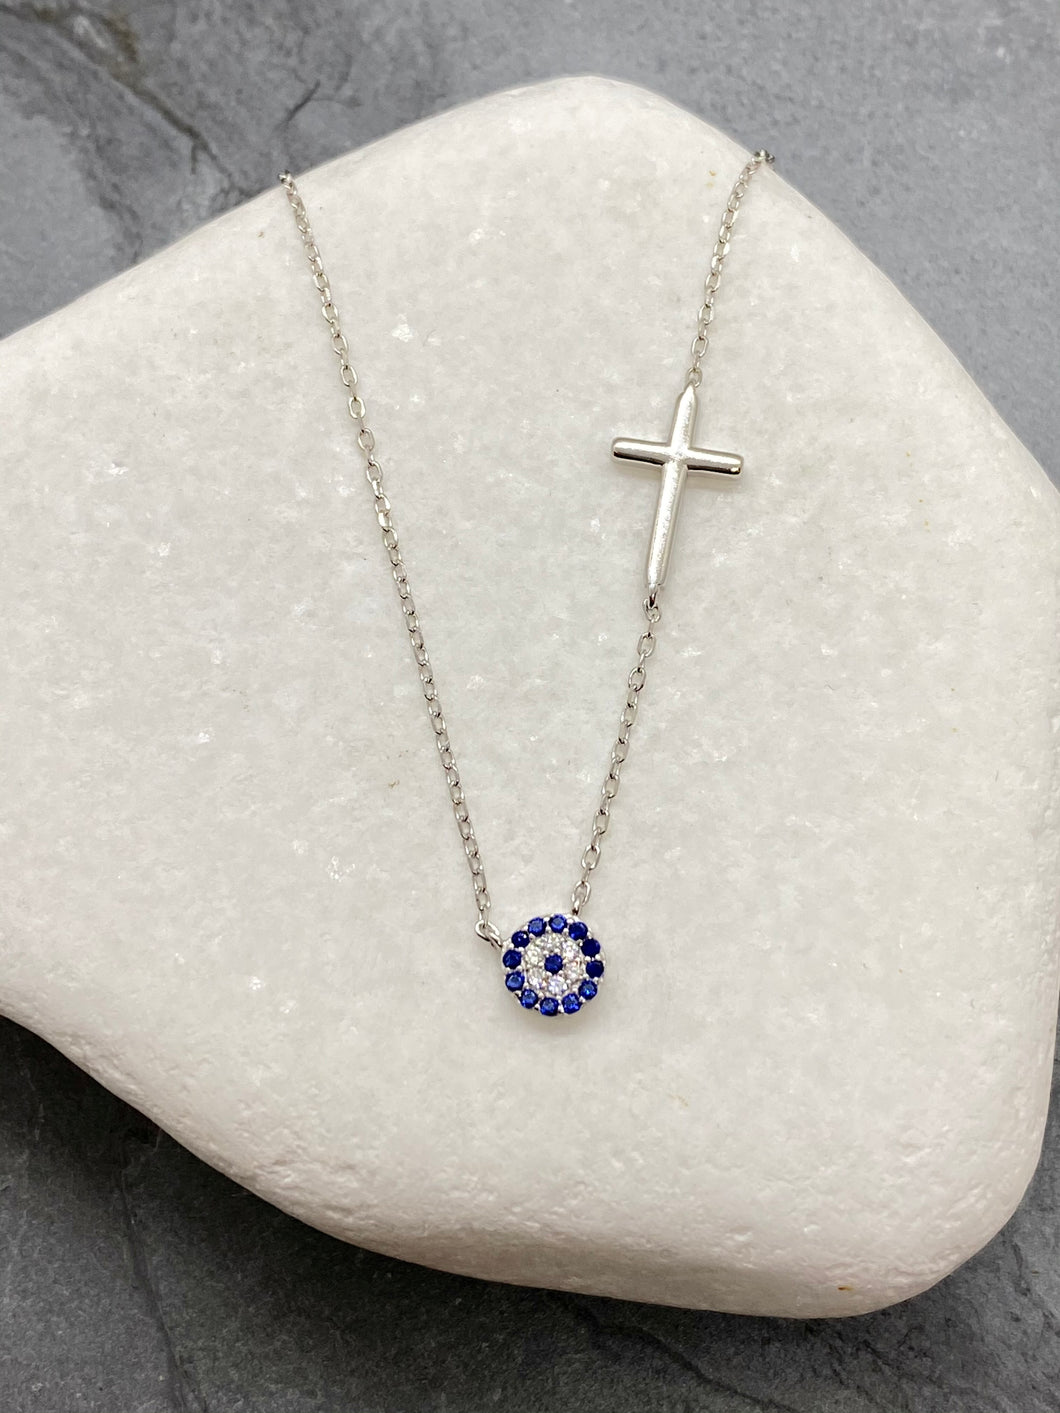 925” Sterling Silver Evil Eye Mati with Rhinestones and Cross Necklace SN6